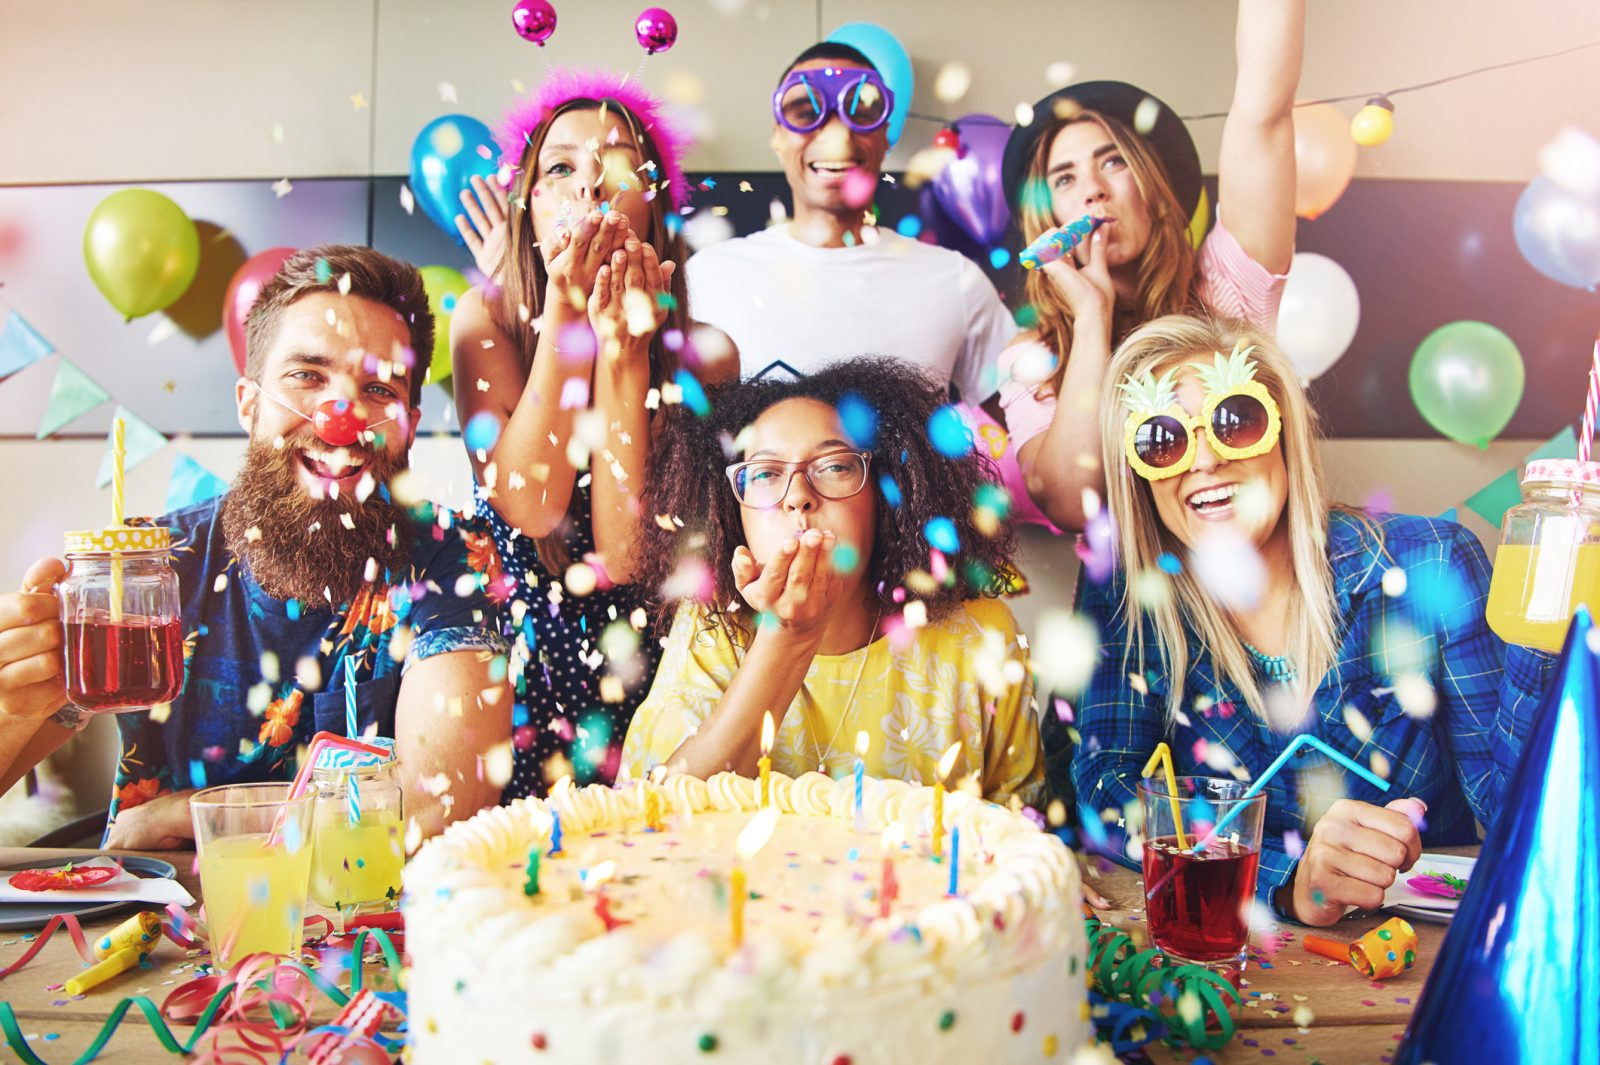 What Unpopular Food Are You? Confetti flying around group celebrating a party